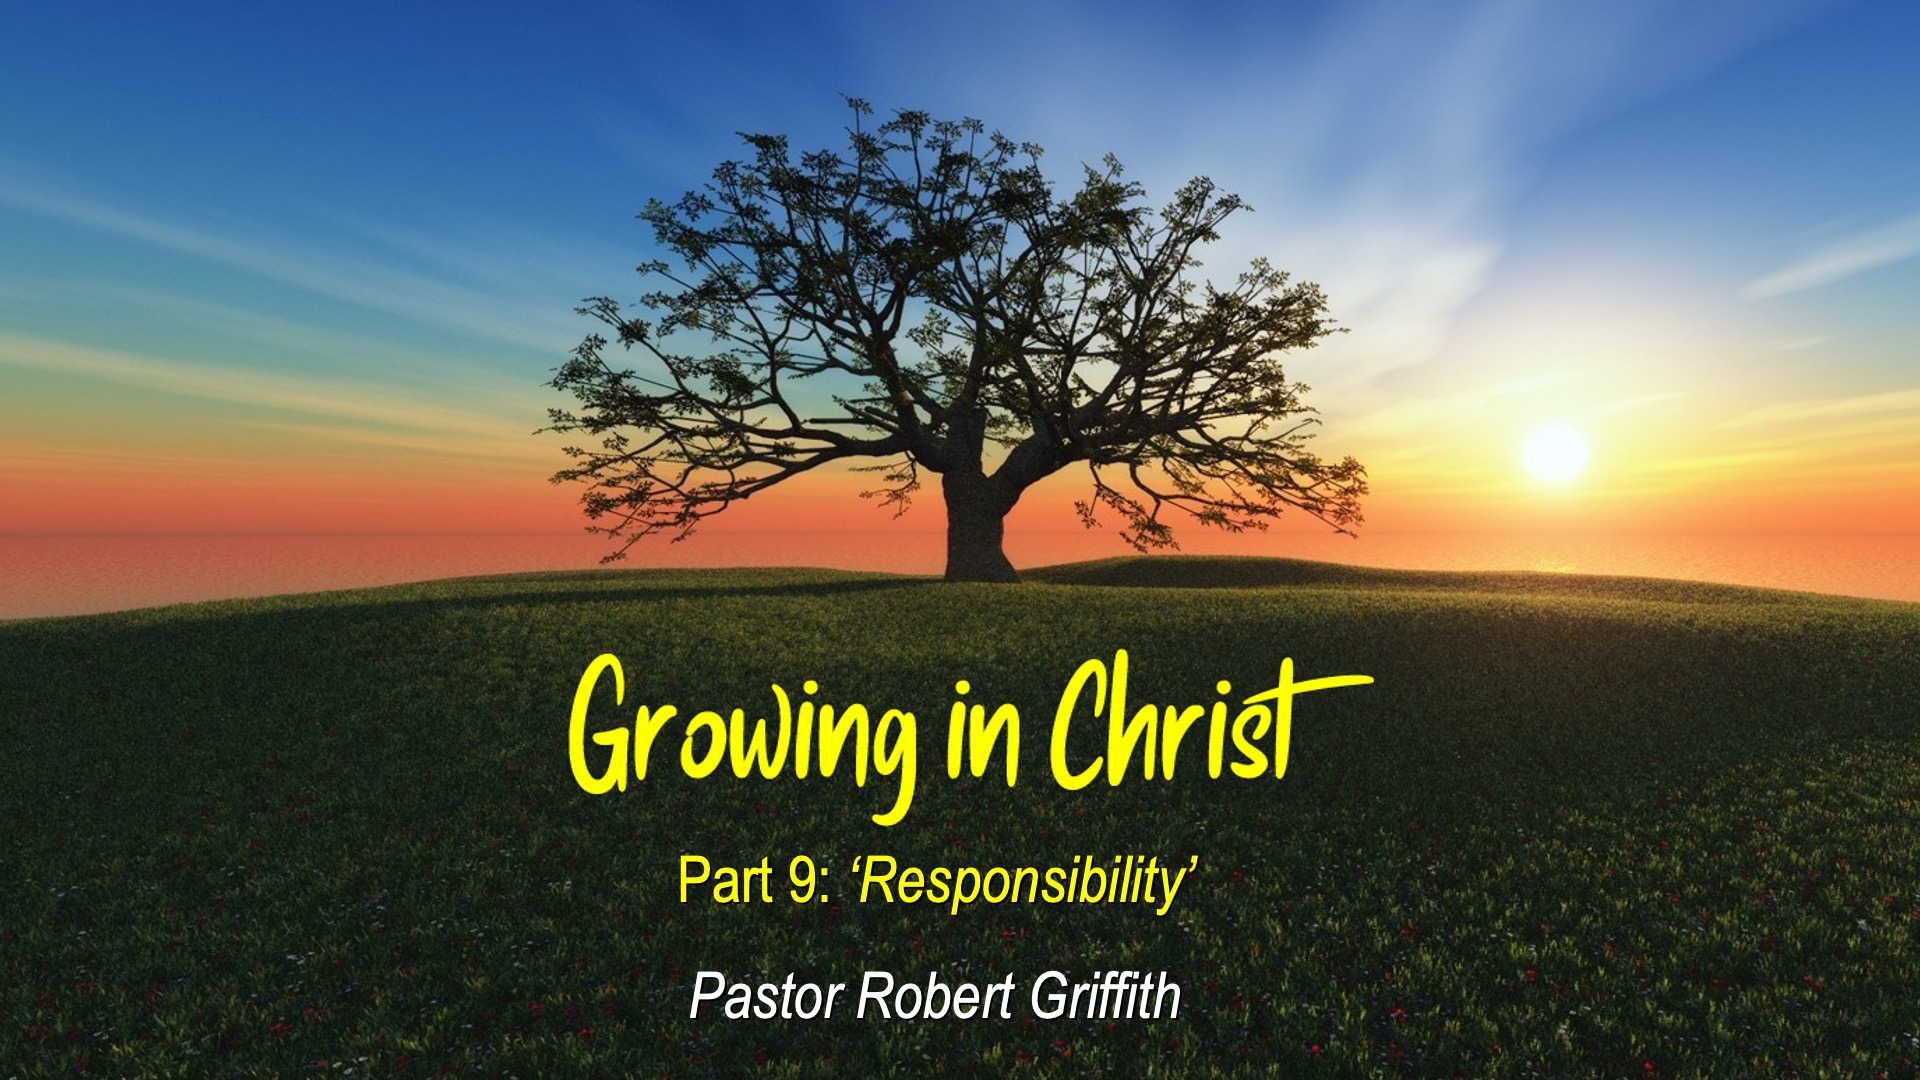 Growing in Christ (9)‘Responsibility’